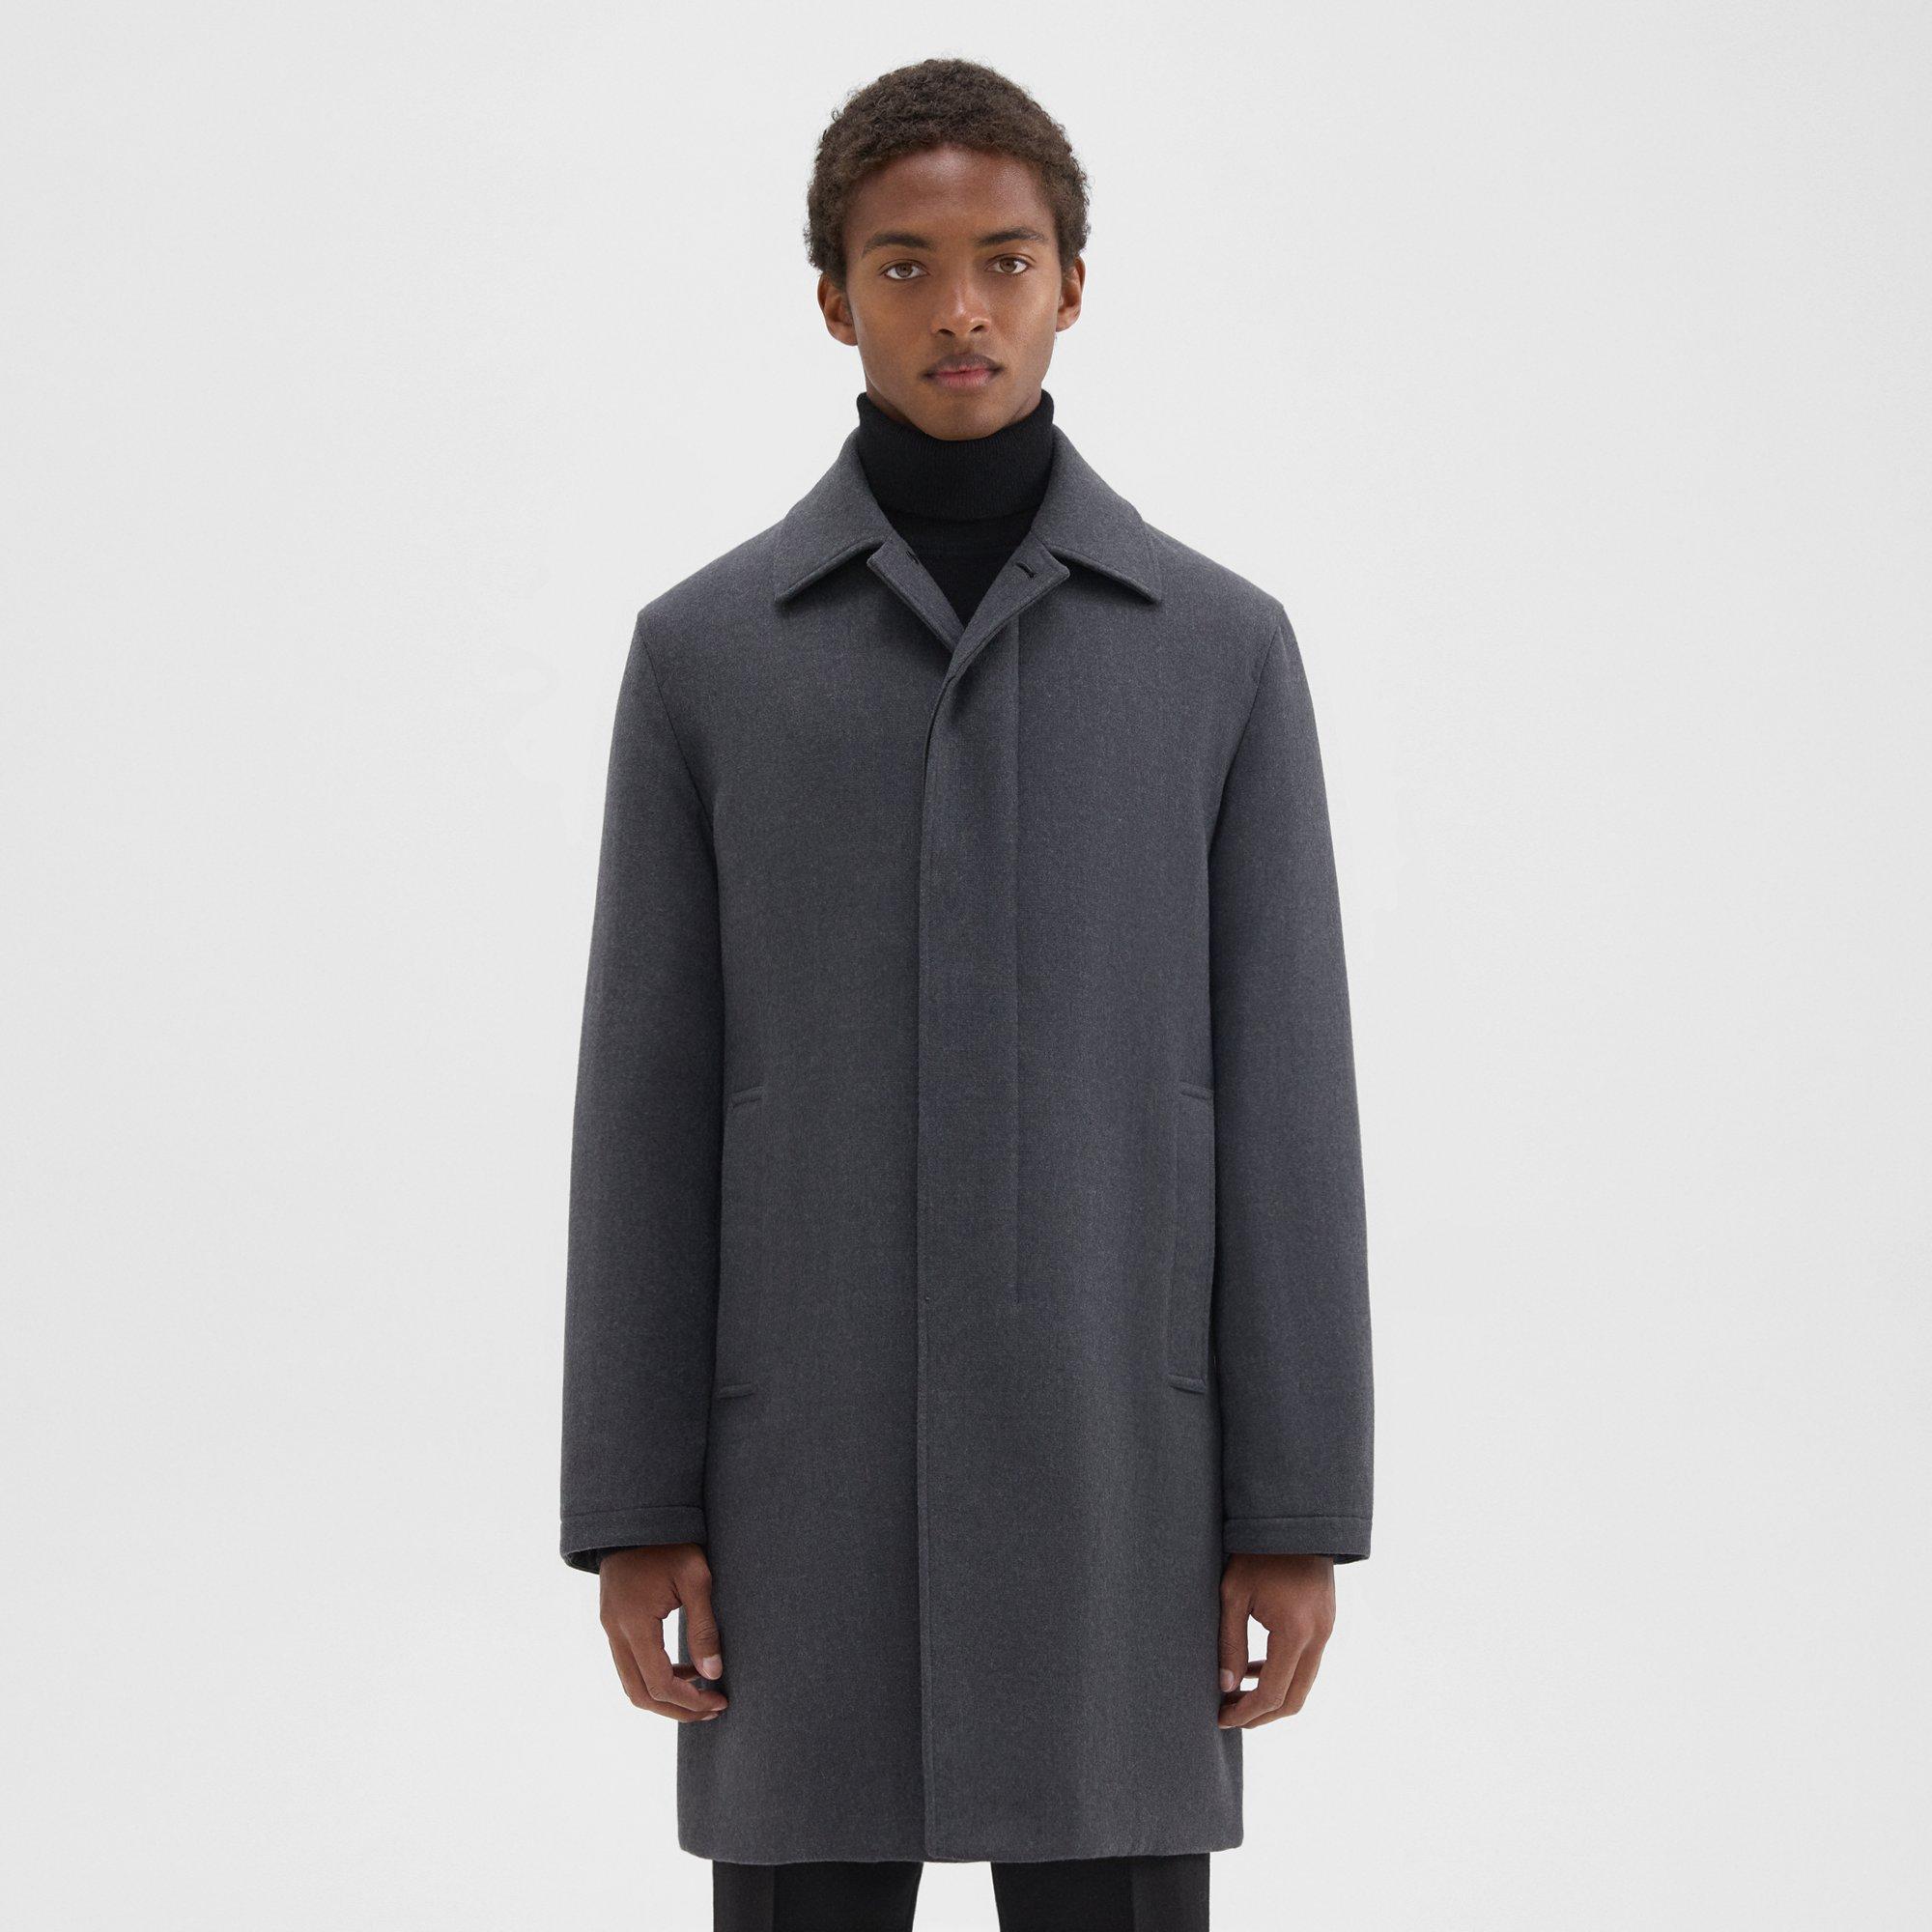 Theory Din Coat in Double-Face Wool Flannel